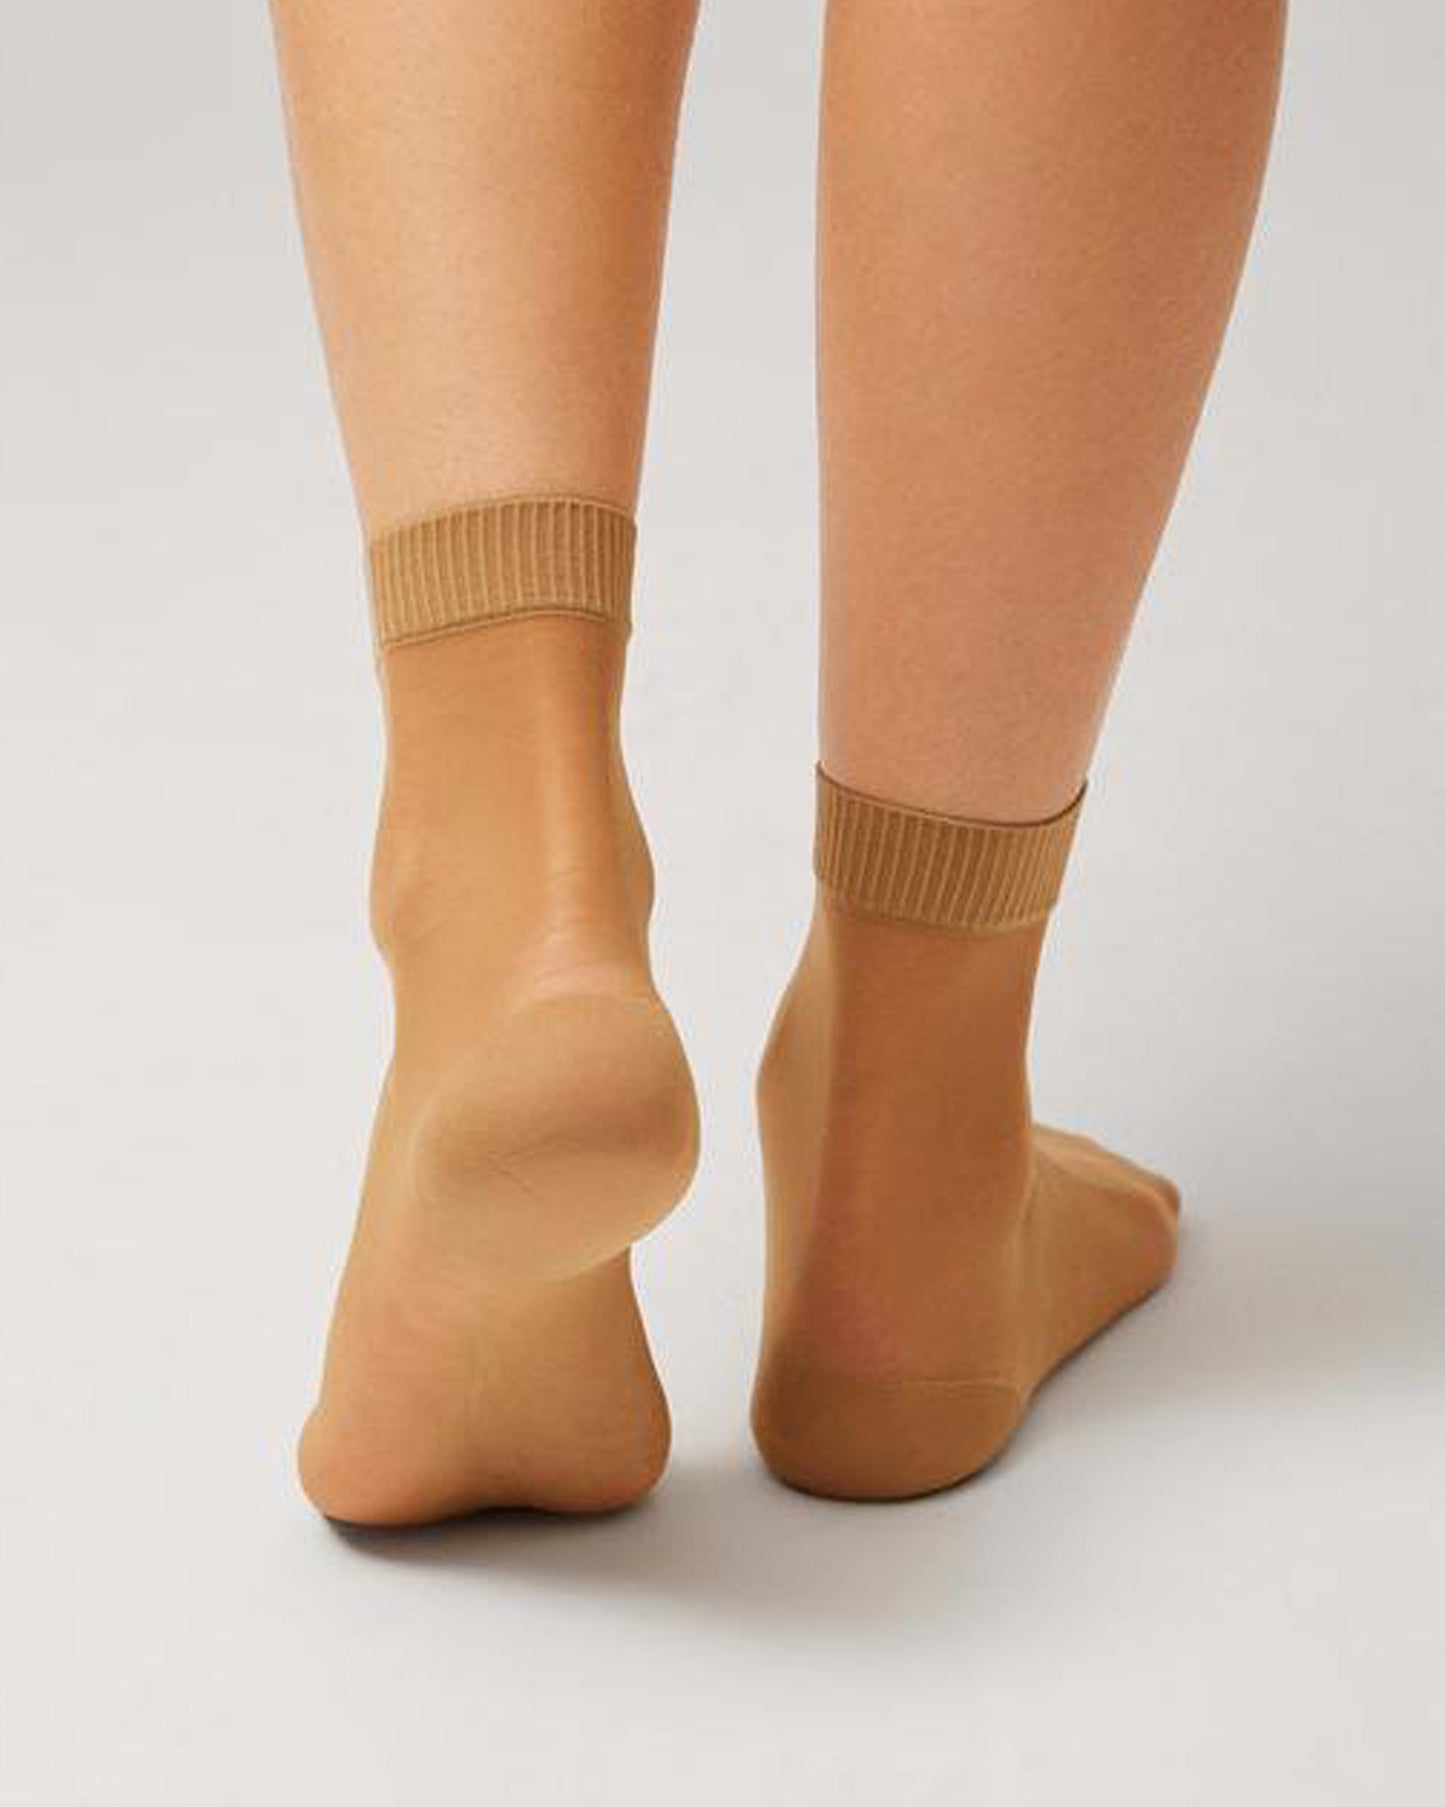 Ysabel Mora 18114 Sheer Reinforced Ankle Socks - Sheer tan ankle sock with an opaque reinforced toe and heel and soft ribbed anti-pressure comfort cuff.